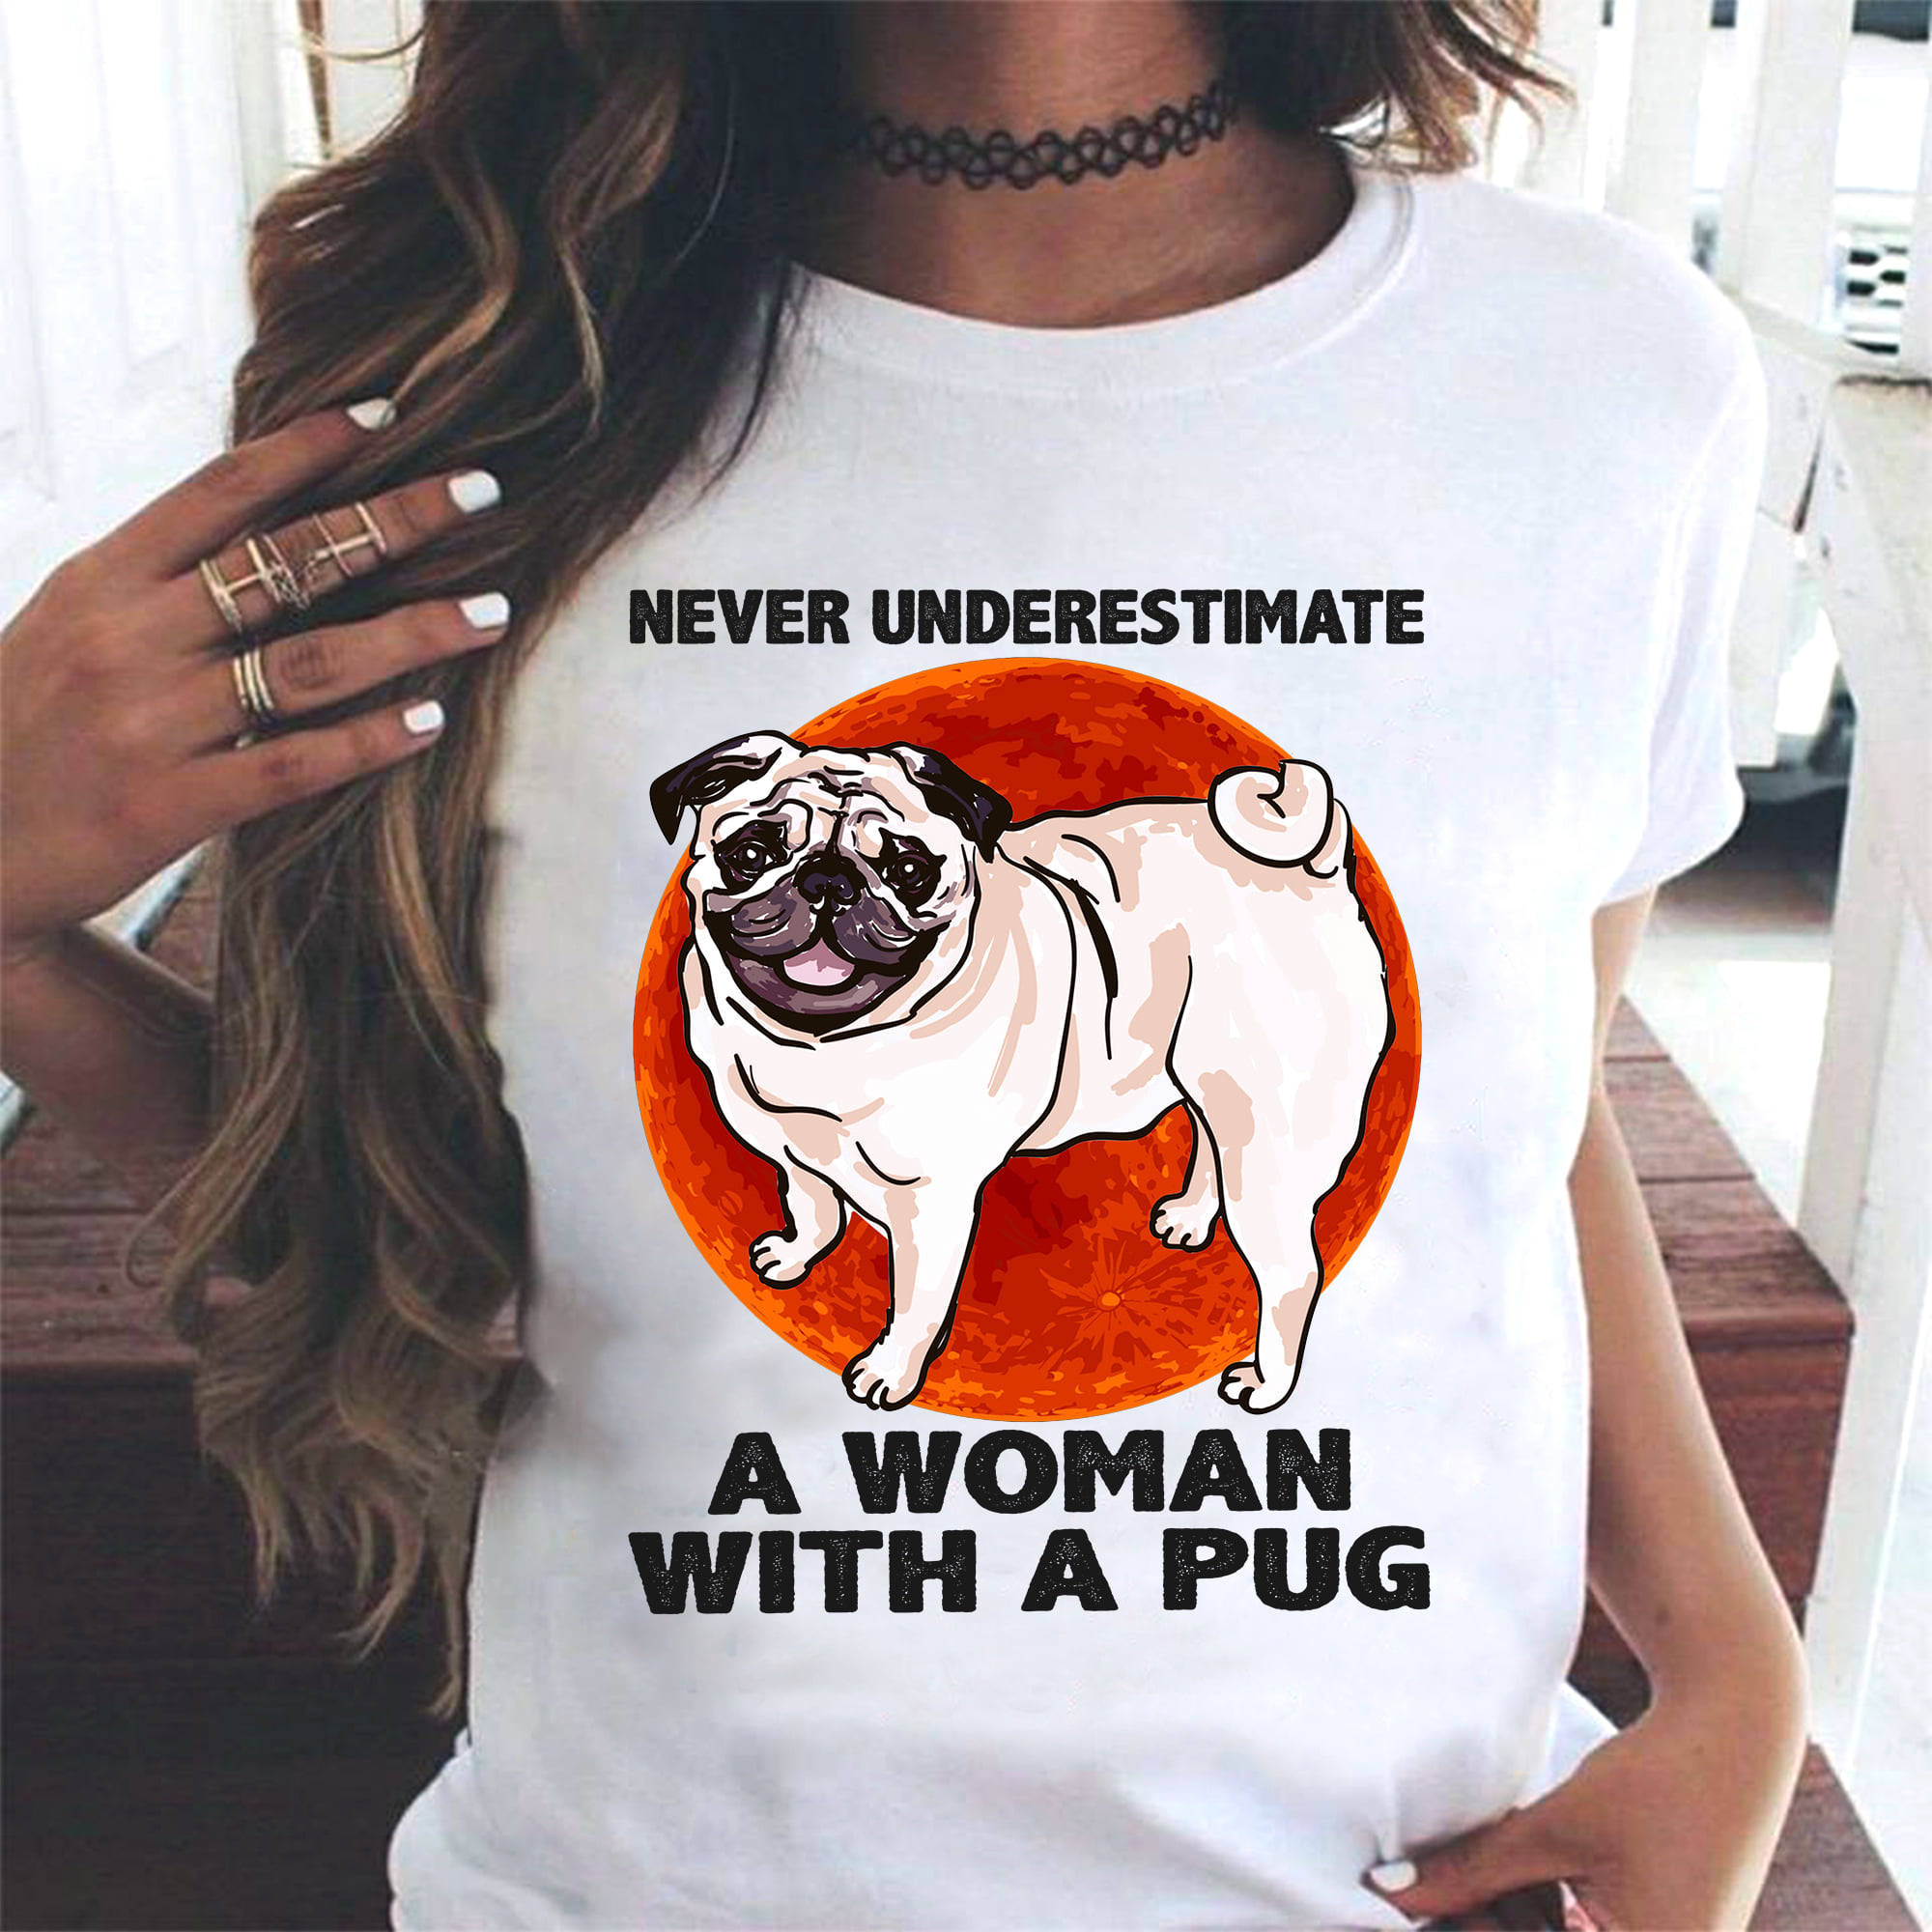 Never underestimate a woman with a pug - Woman loves pug dog, gorgeous pug dog lover